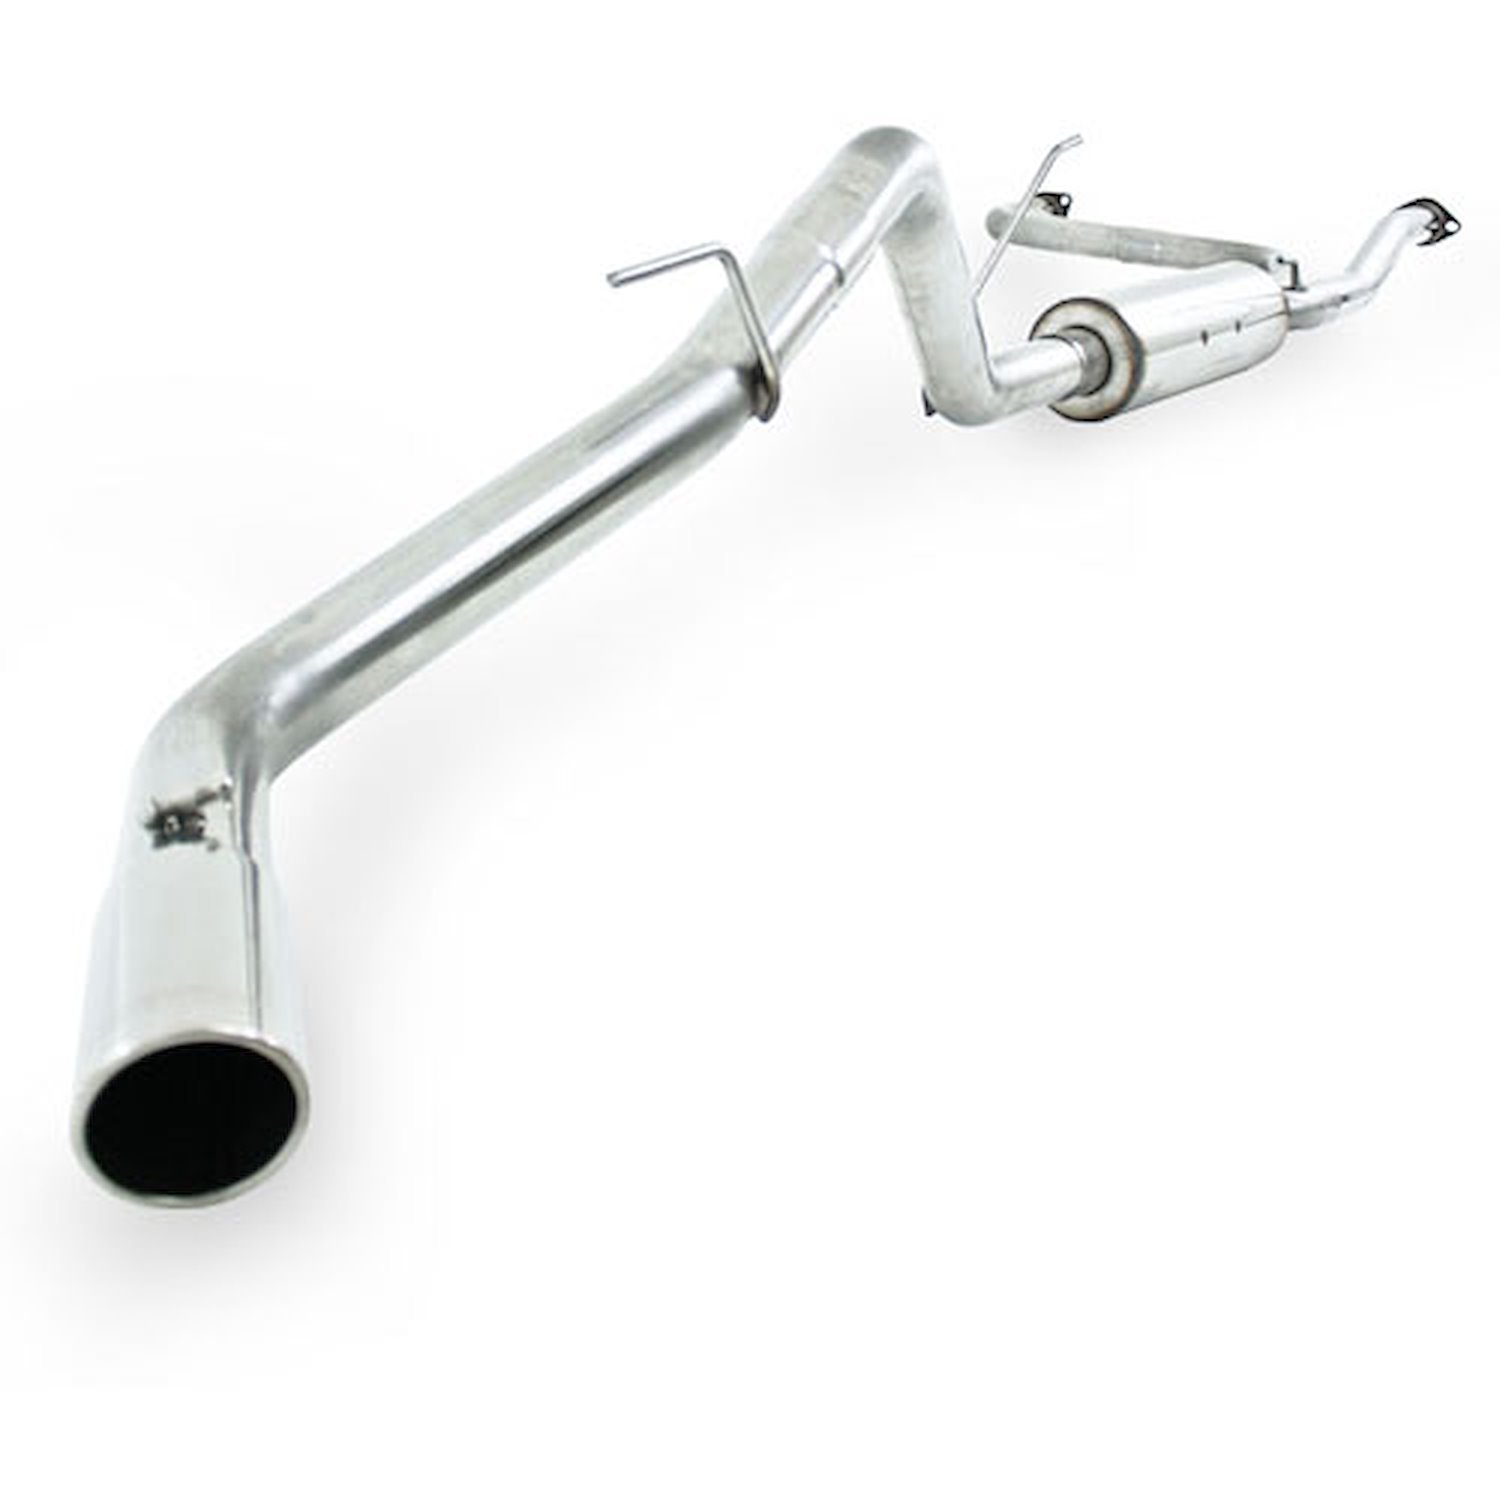 XP Series Exhaust System 2005-2011 for Nissan Frontier 4.0L V6